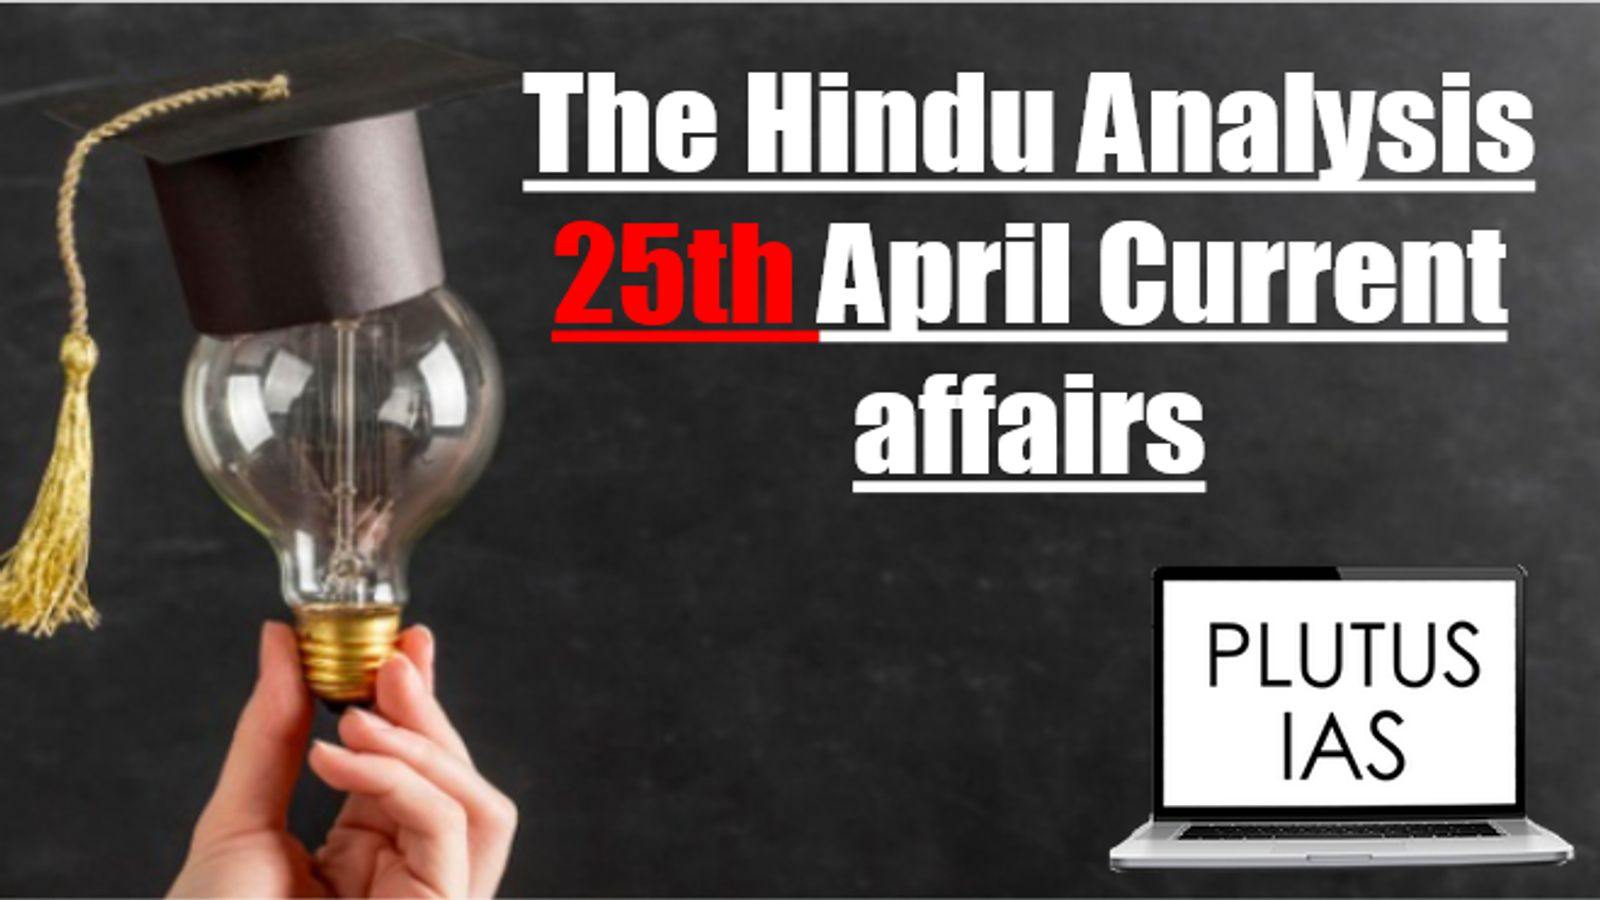 Today Current Affairs 25th April